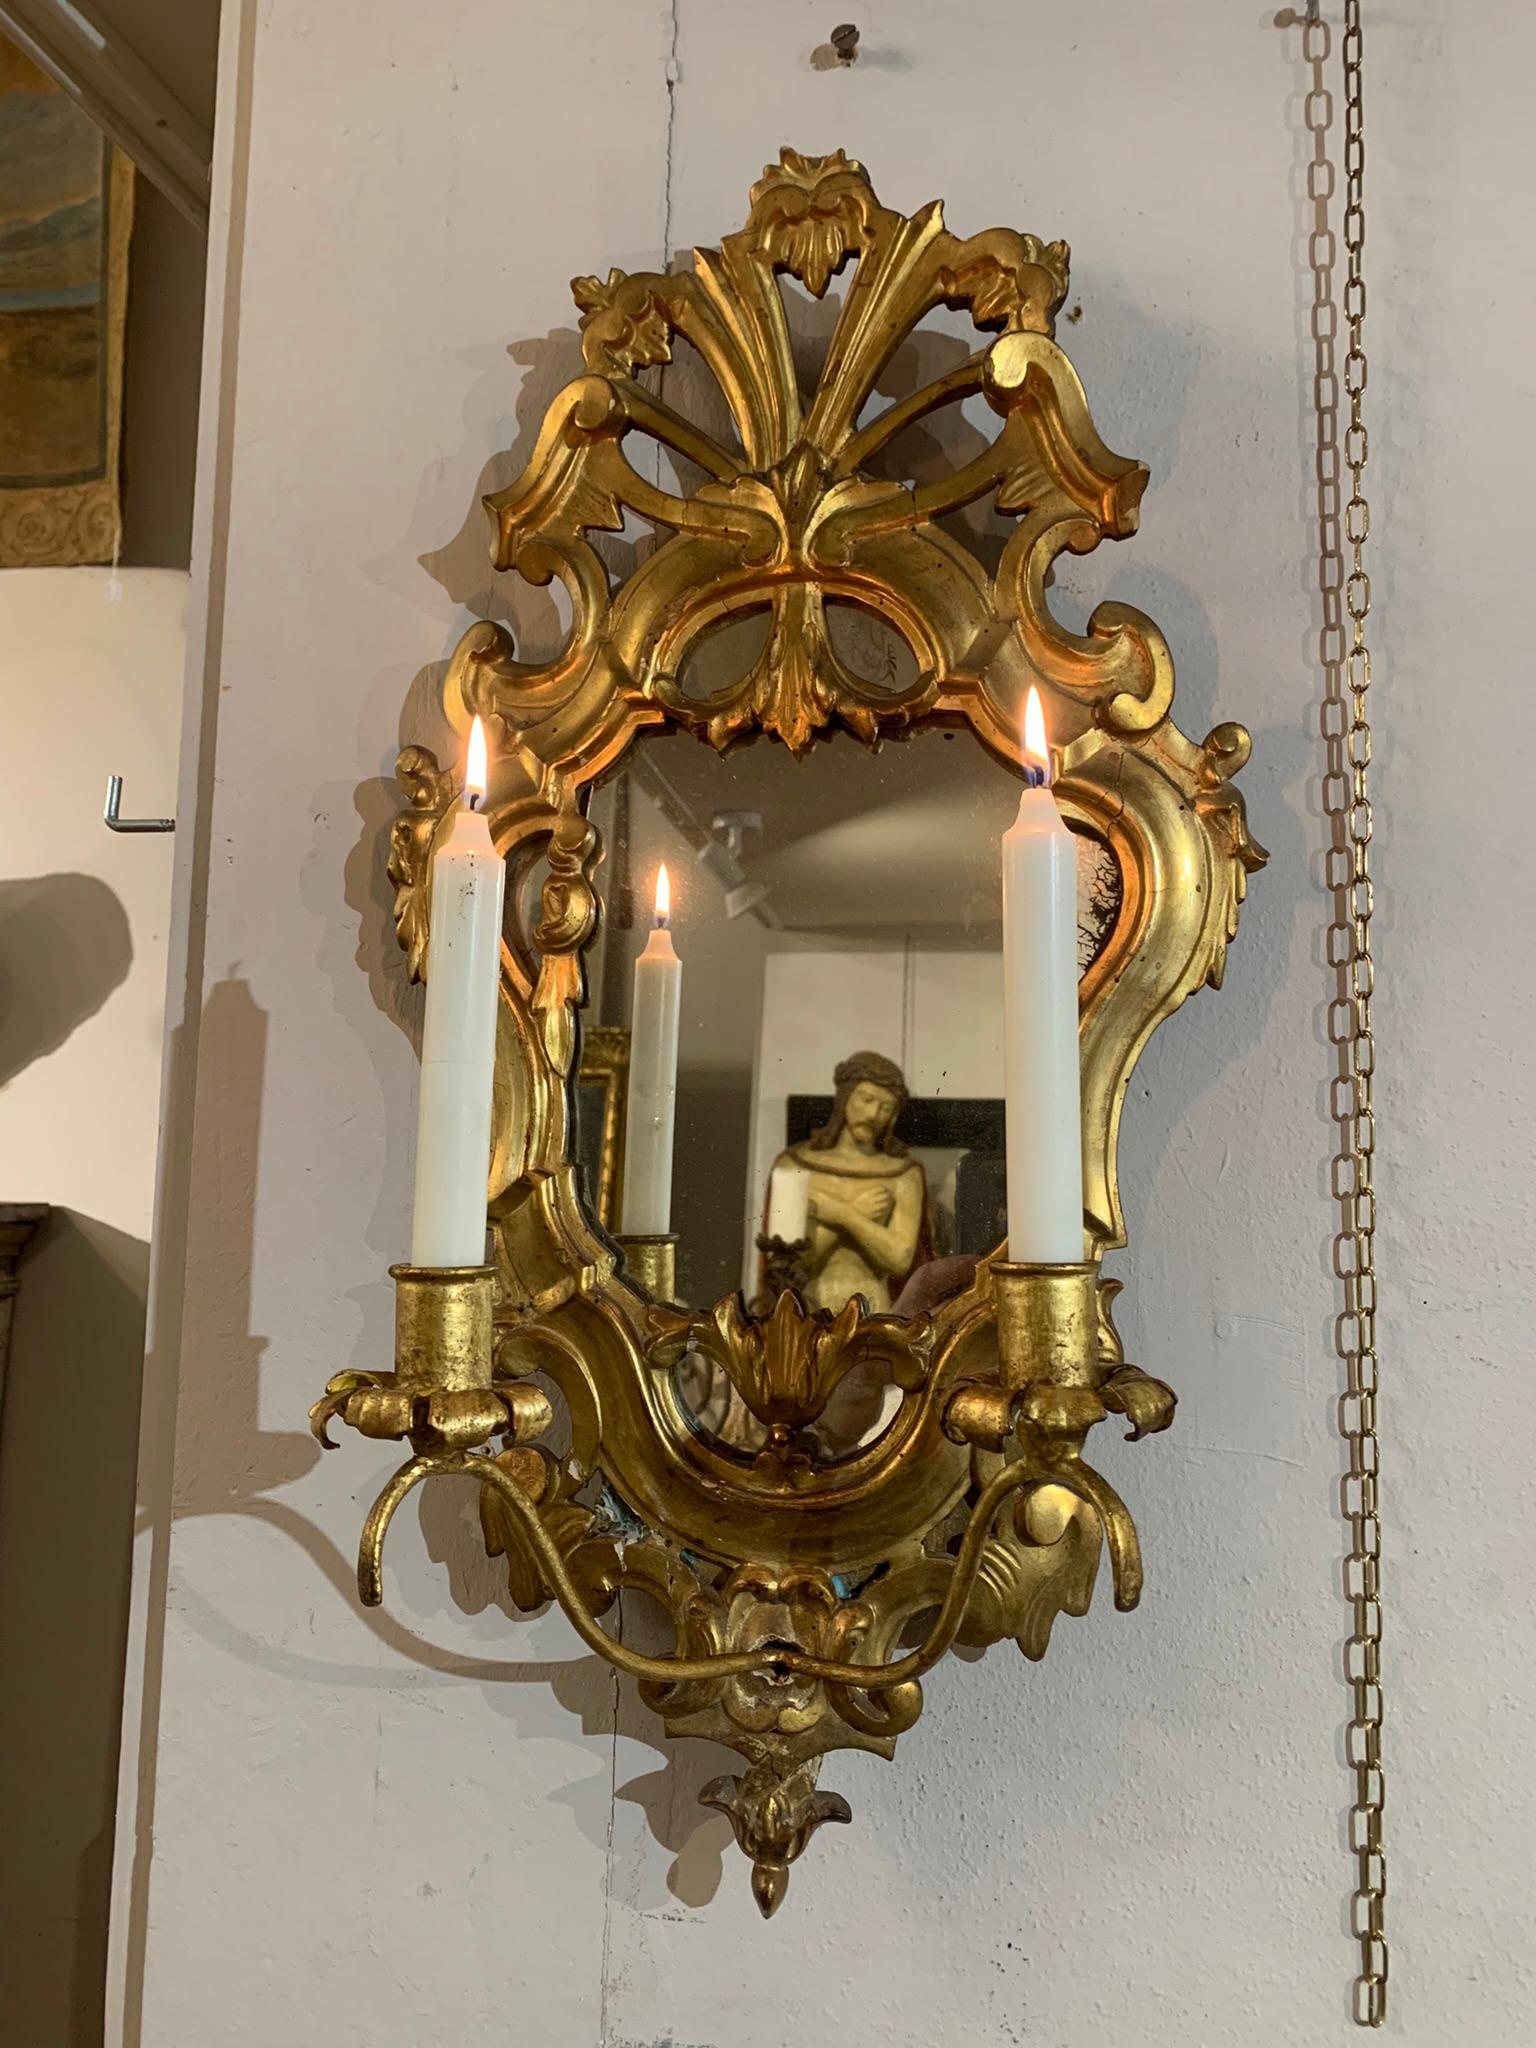 Beautiful pair of appliques in carved and gilded wood with pure gold leaf, mercury silver mirrors in good condition.
A pair of gilded iron candle holder arms are inserted into the lower part.
Structure in fir, it is possible to electrify them.